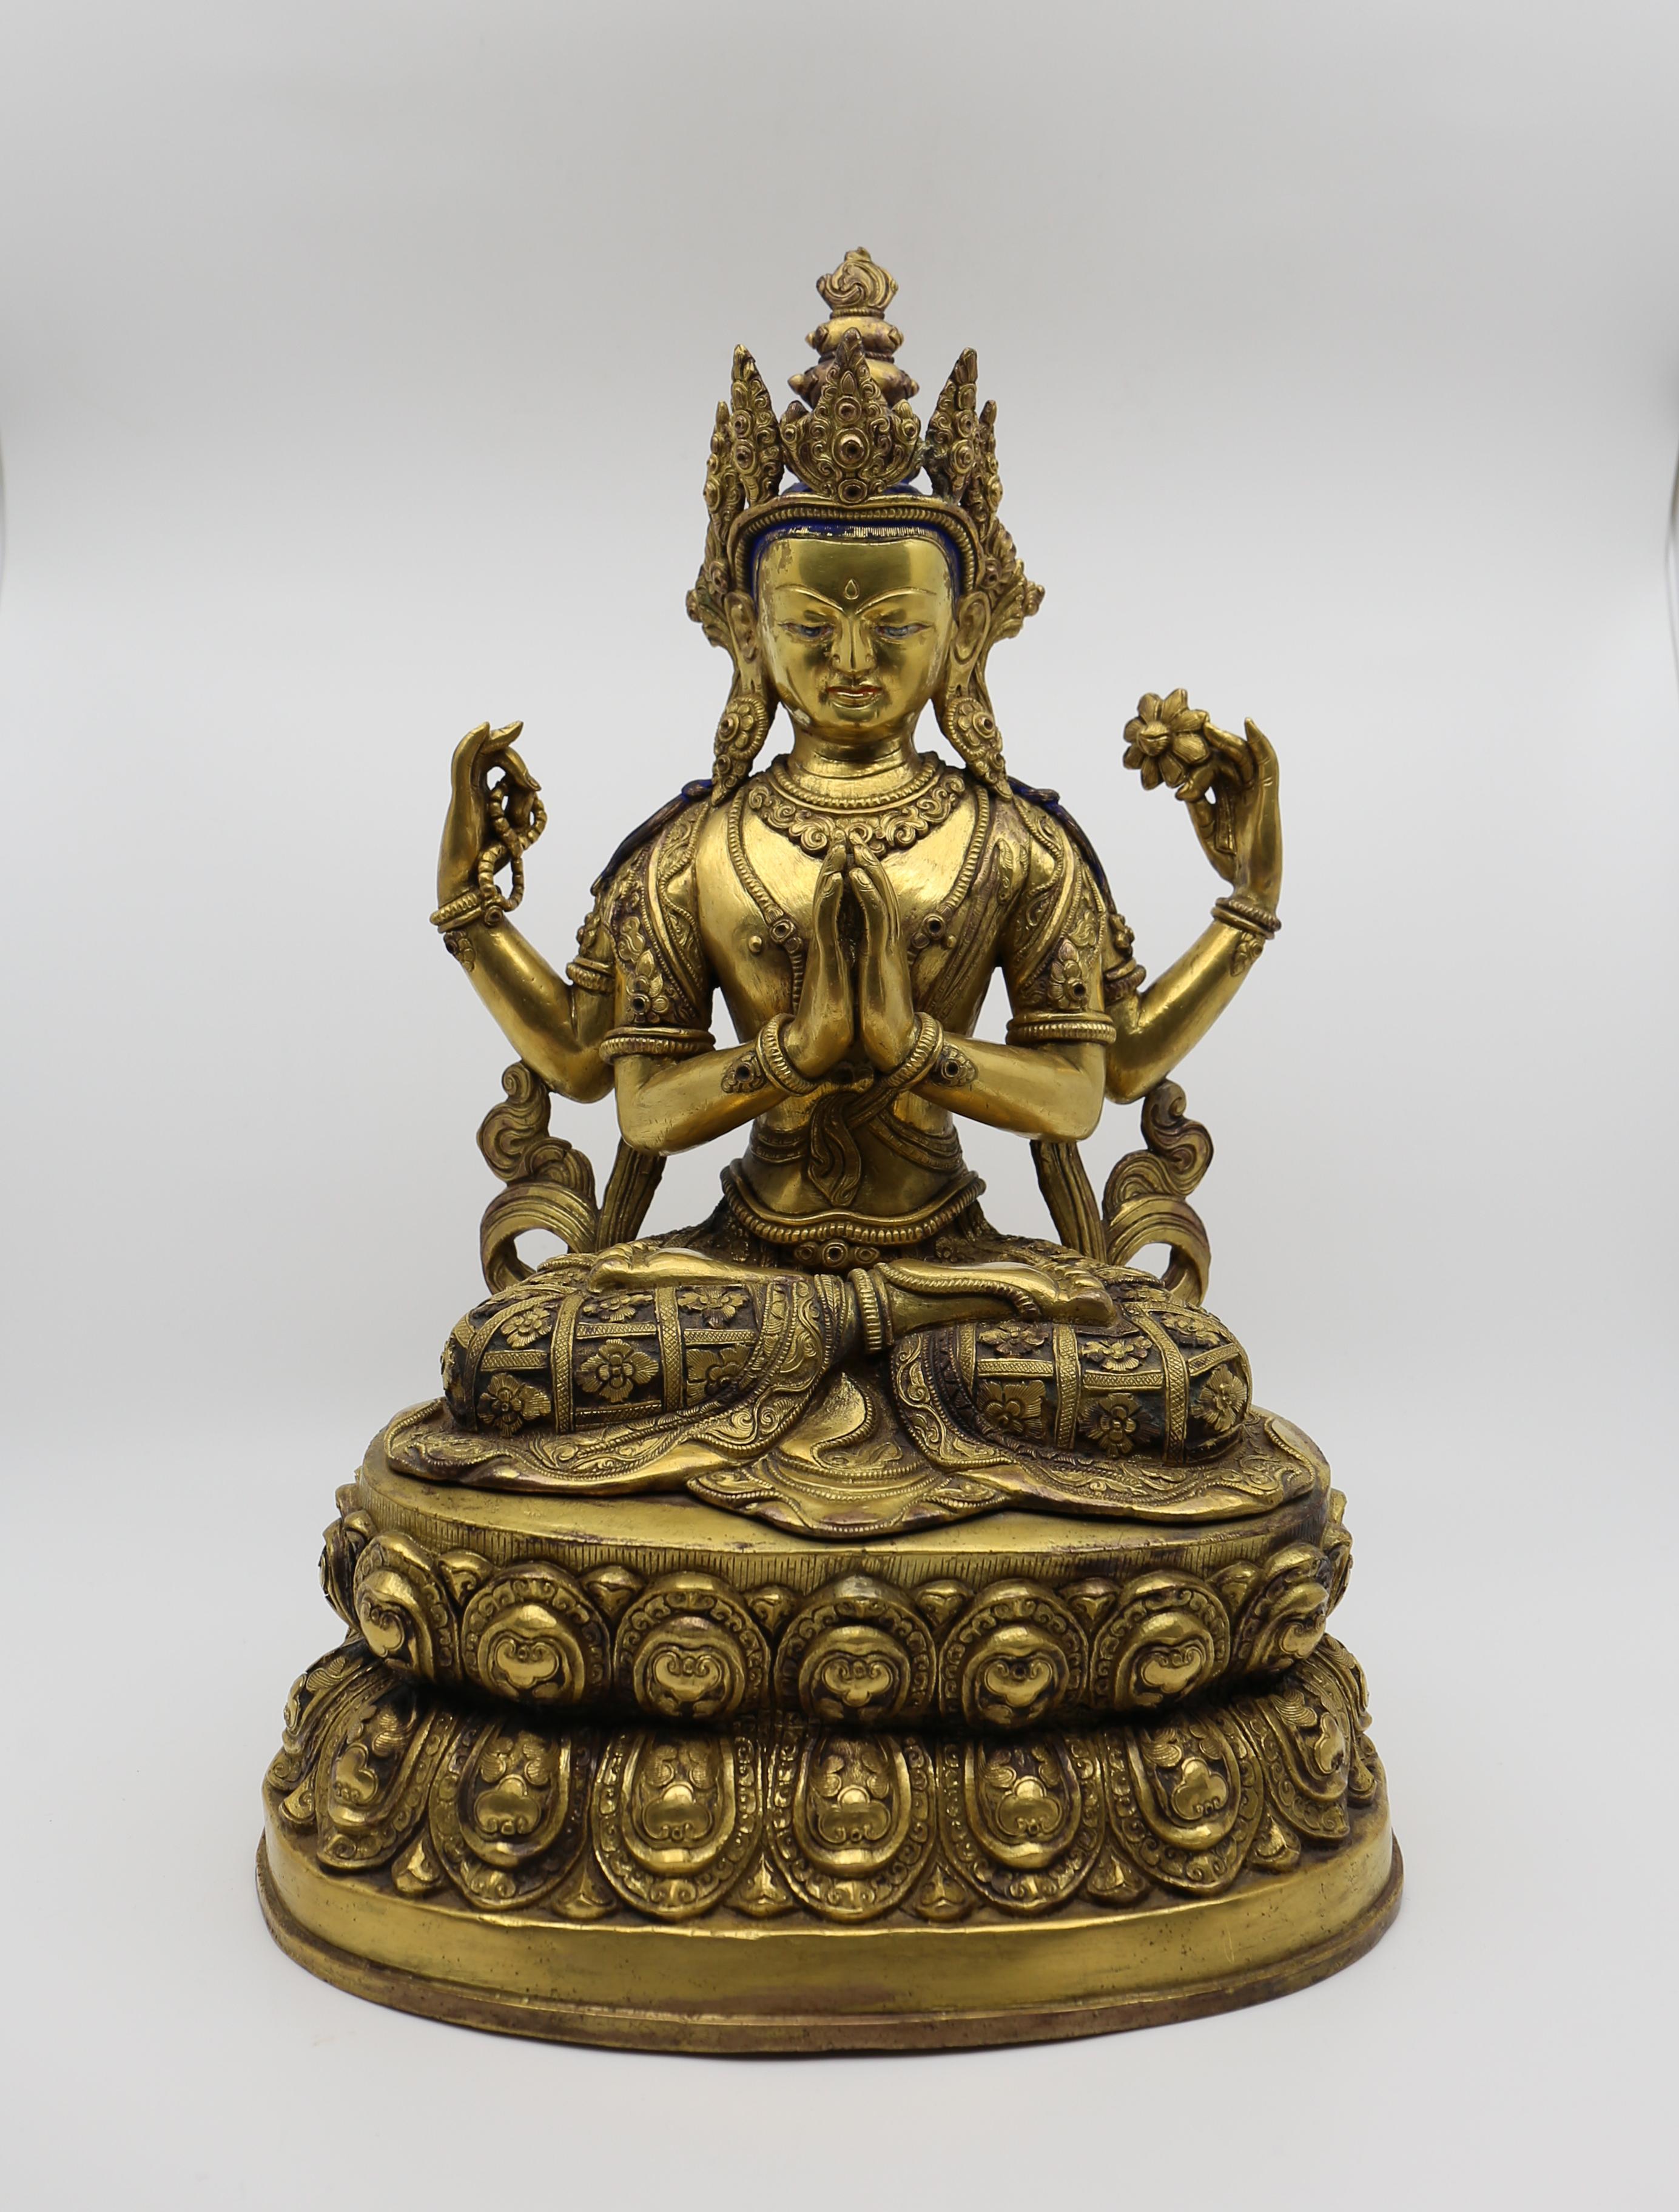 20th century gold gilded bronze Buddha/Bodhisattva.
A finely cast bronze Buddha statue in gold gilt with modeled and incised floral motifs. Superb example- finely cast, beautifully sculpted, with a beautiful patina.